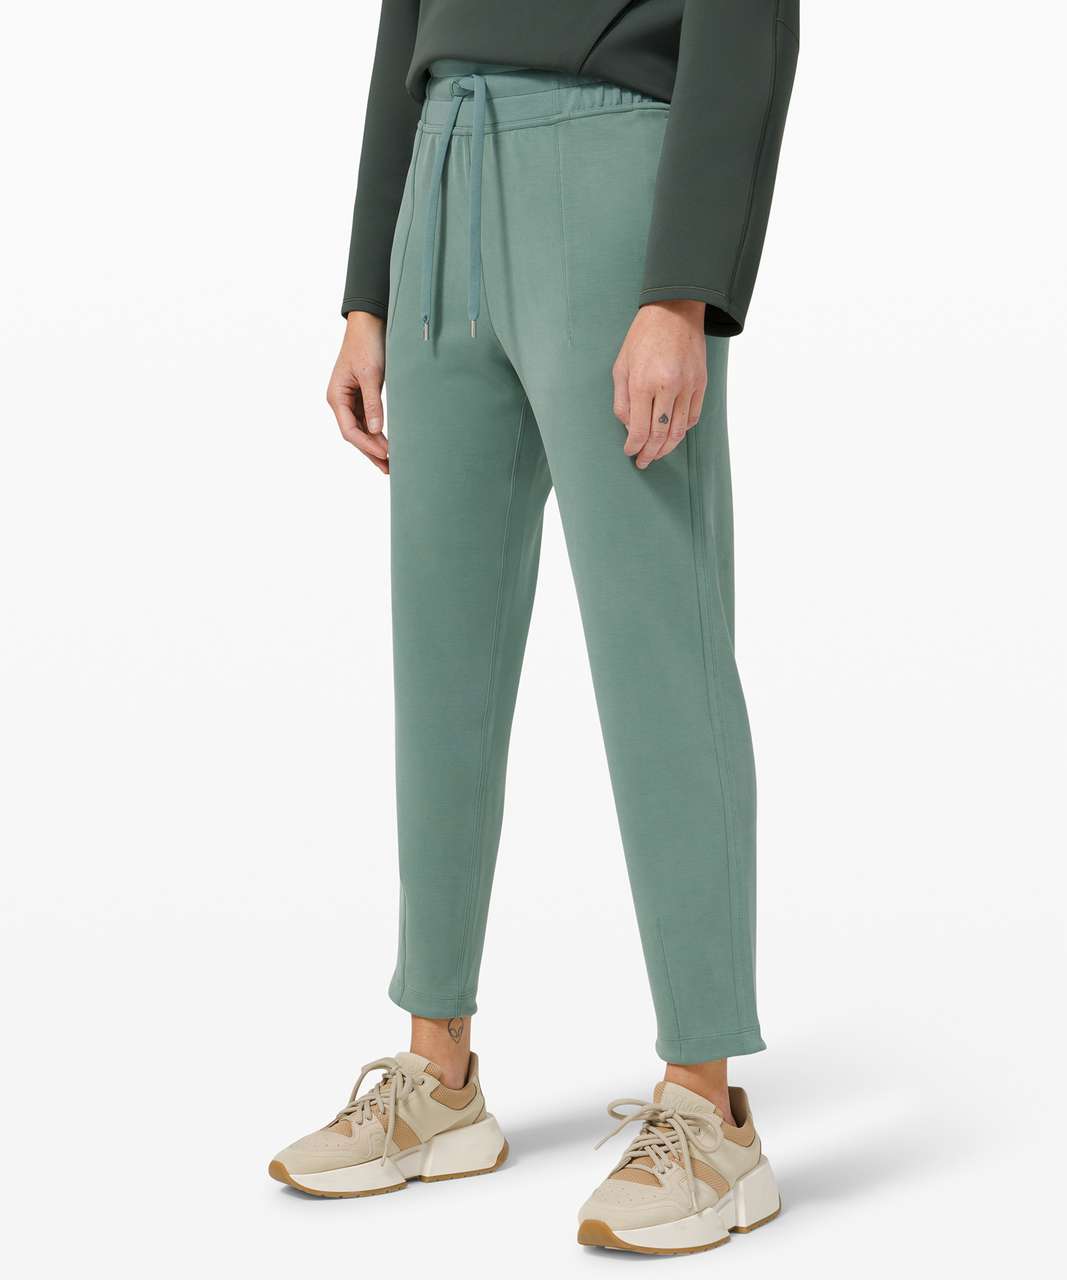 Lululemon Soft Ambitions High Rise Jogger - Tidewater Teal